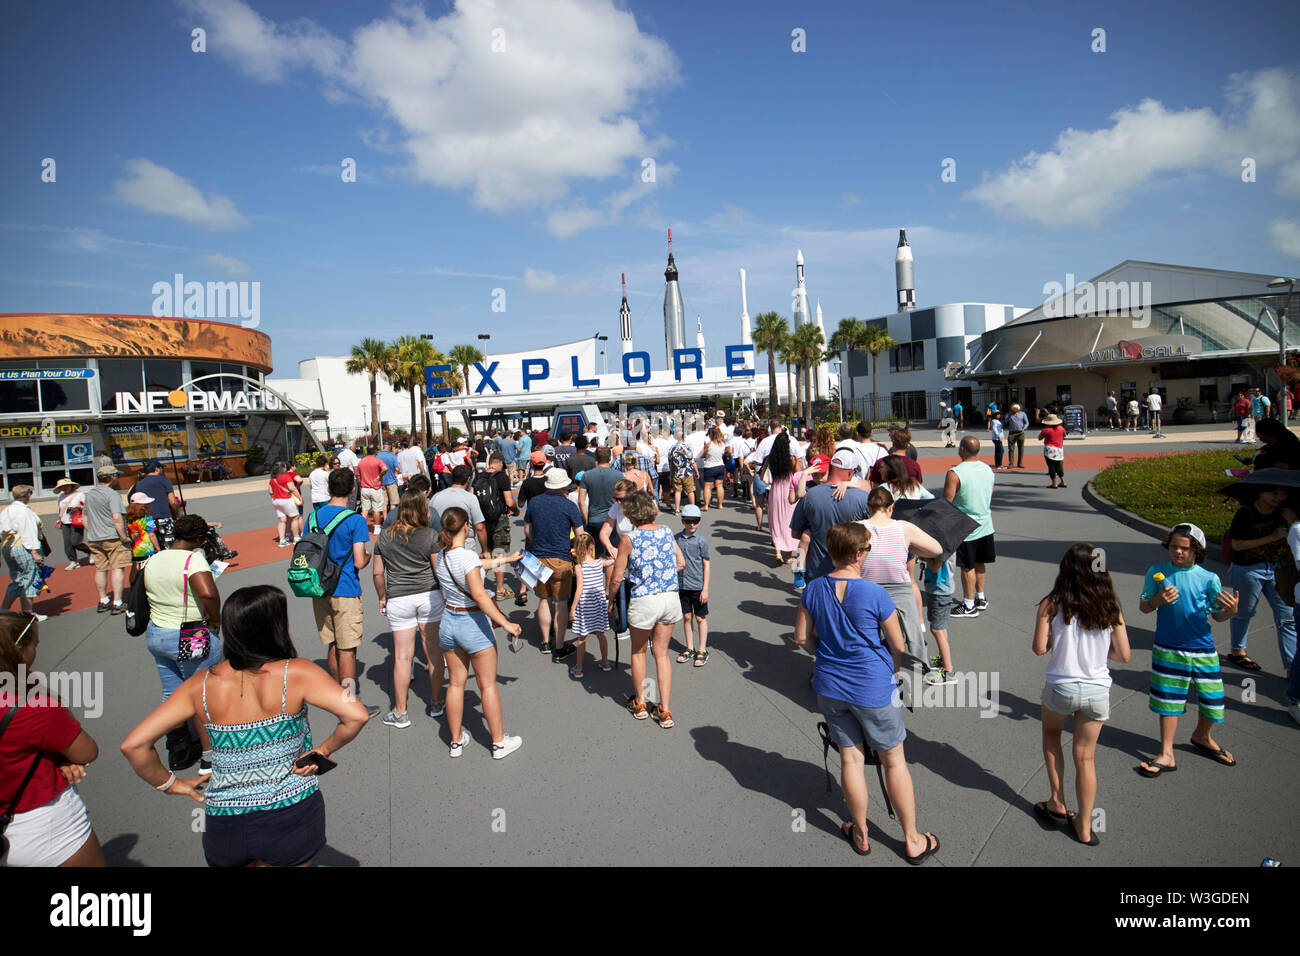 tourists queue up at the entrance to the Kennedy Space Center Florida USA for the week commemorating the 50th anniversary of the apollo moon landings Stock Photo